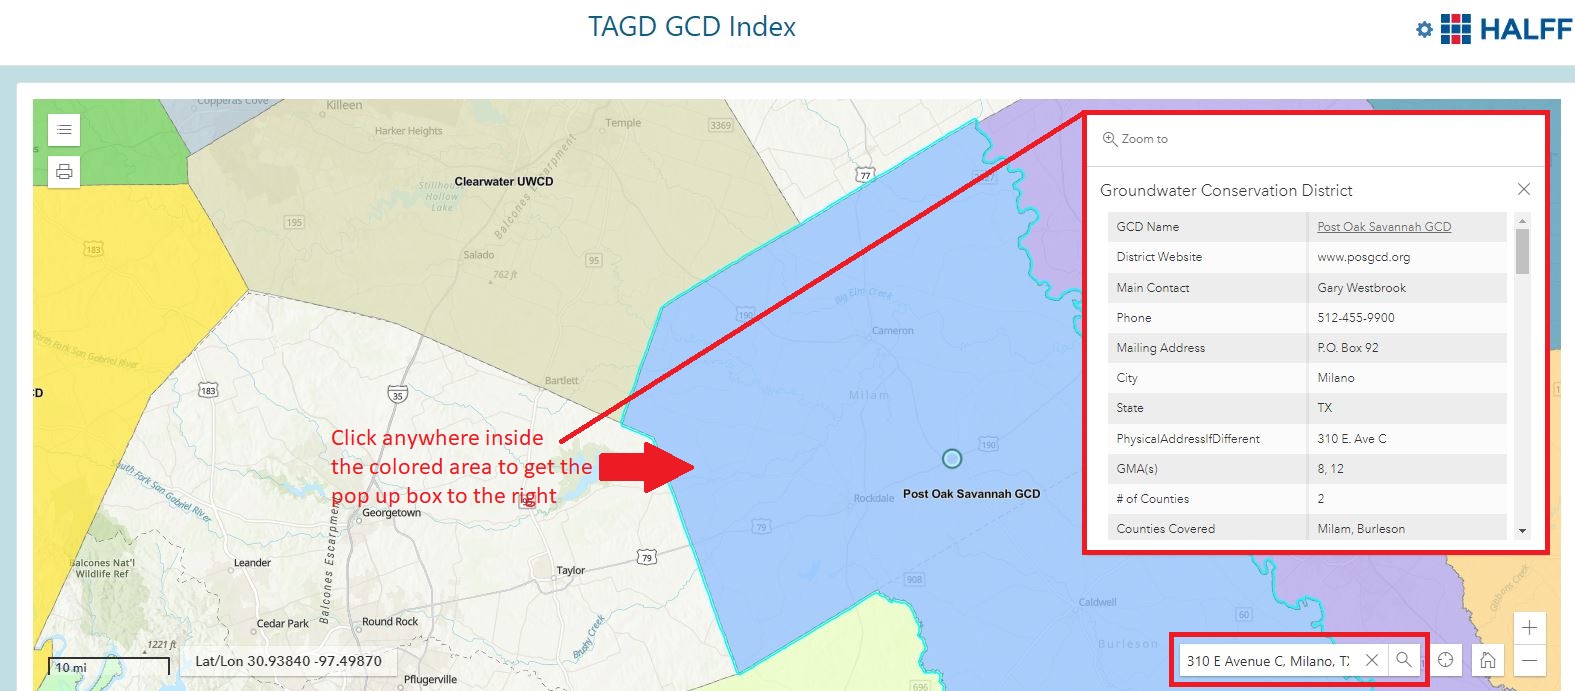 Image of the interactive GCD Index map with the pop up box highlighted in red.